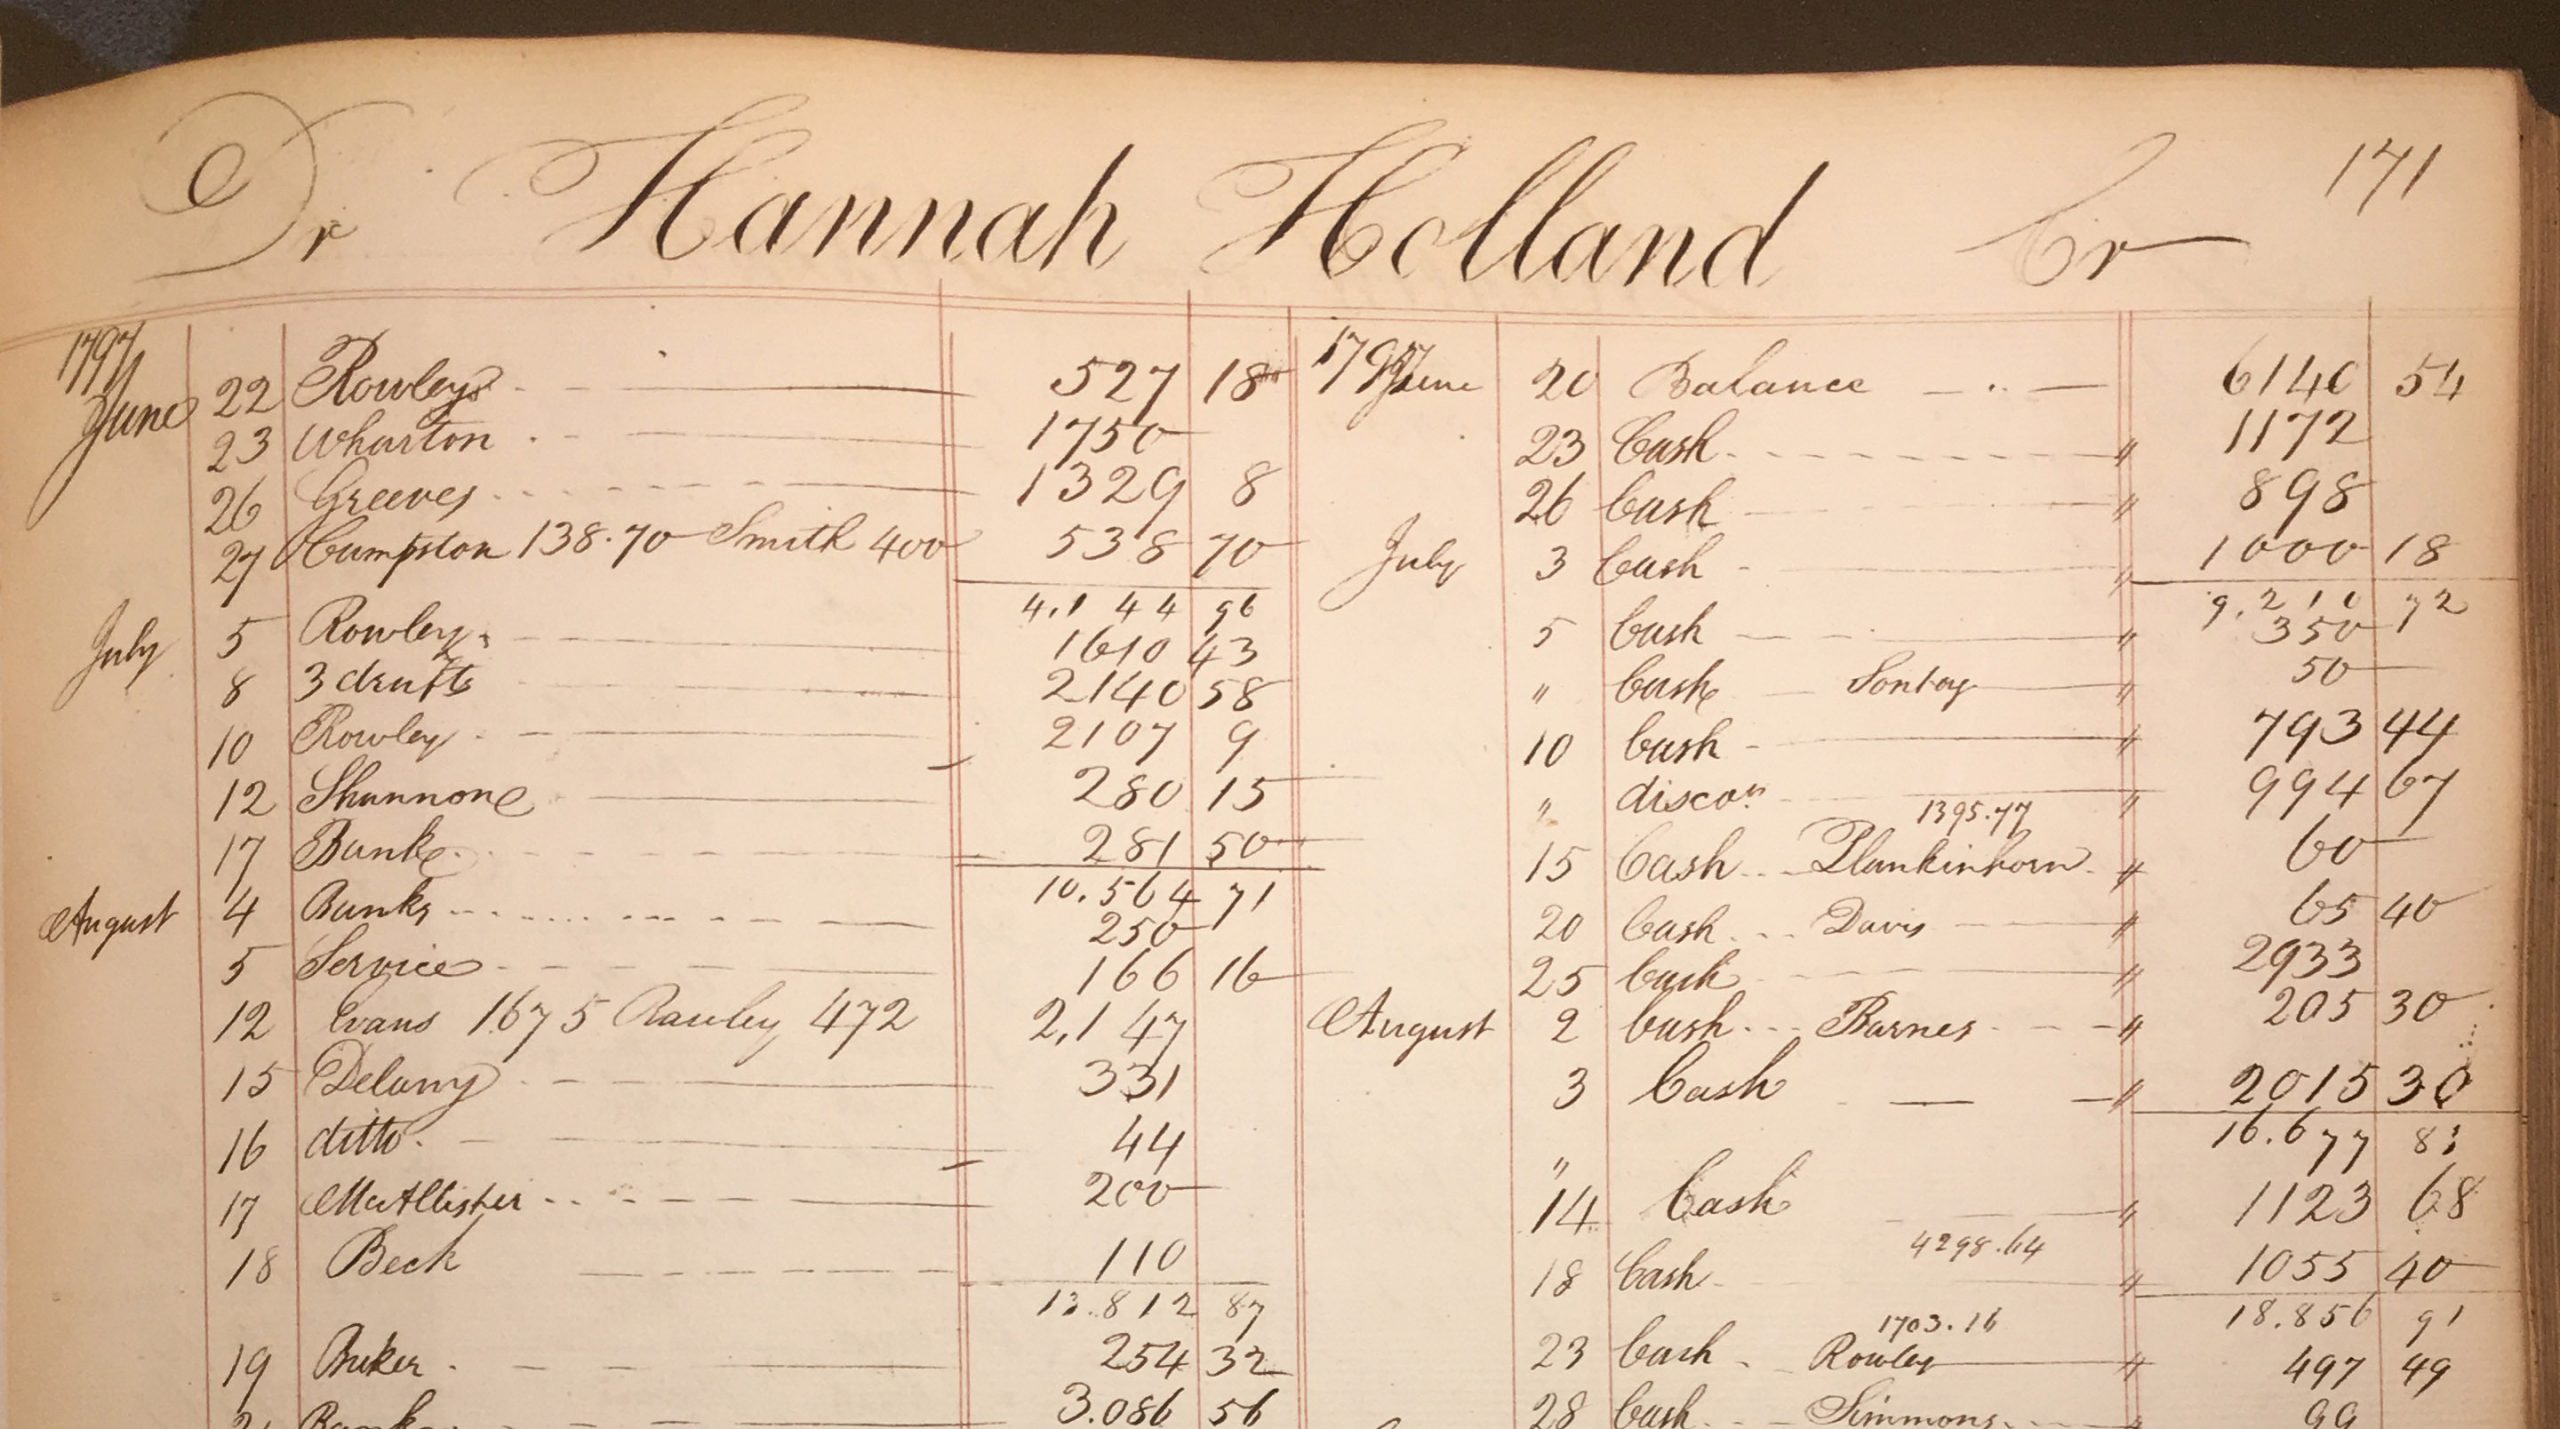 Hannah Holland’s extensive account history. On July 10, she received a loan for $994.67, marked “discou” or “discount loan.”